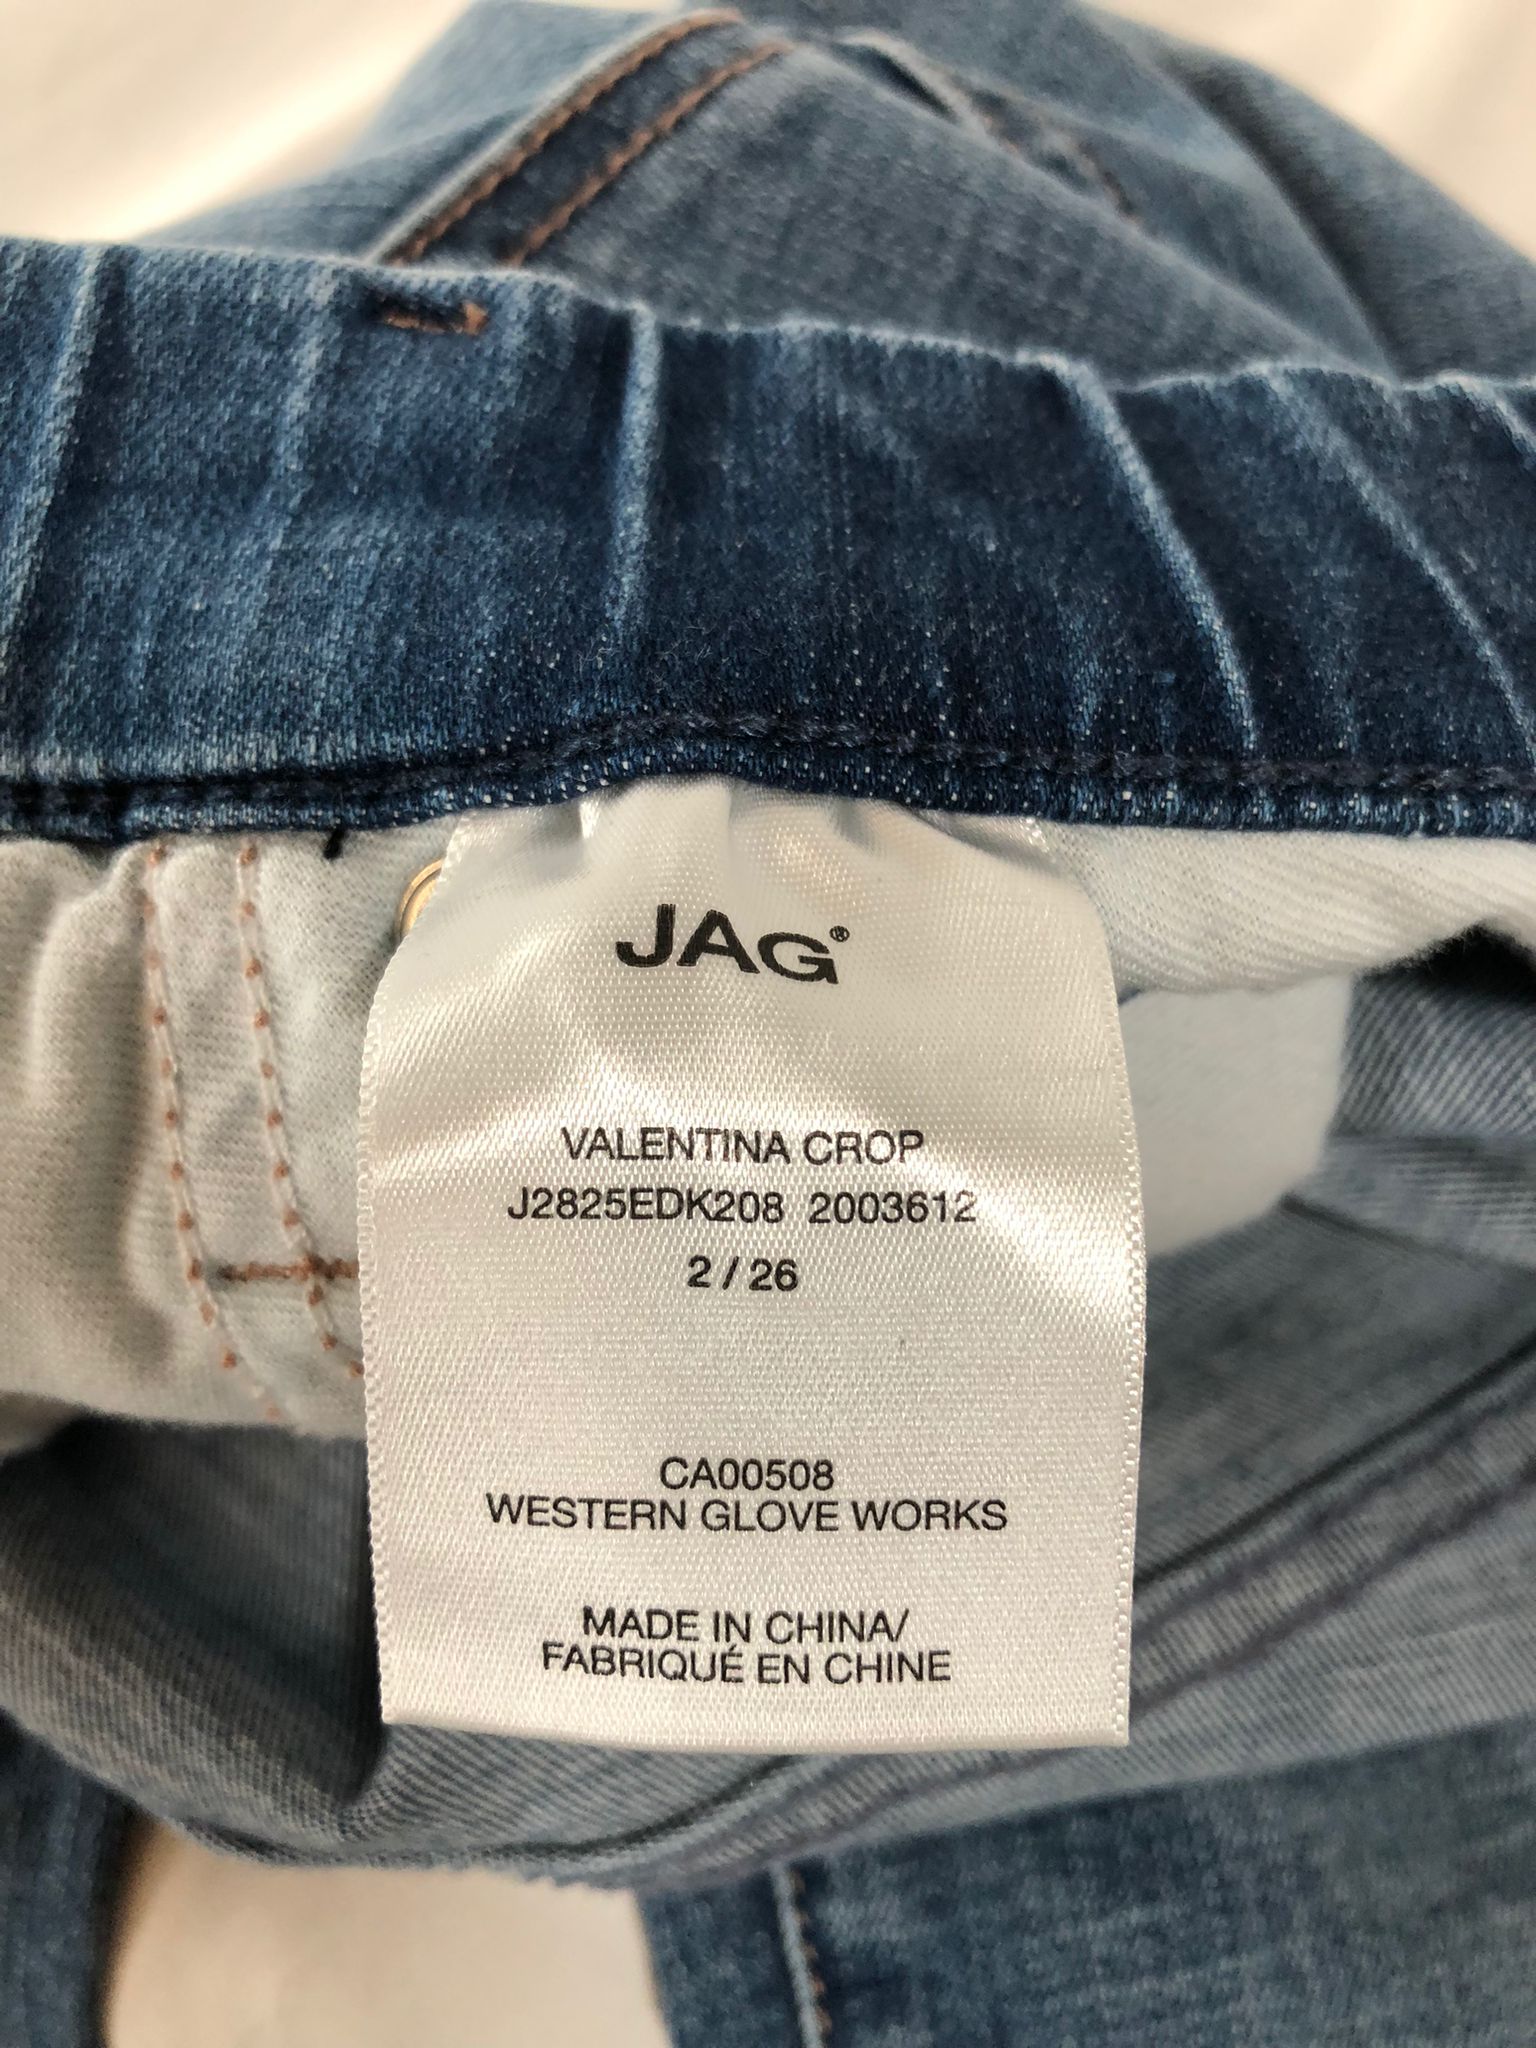 Jag Jeans womens Valentina Crop High Rise Jeans Pants - Fire Island, Size 2 (US)